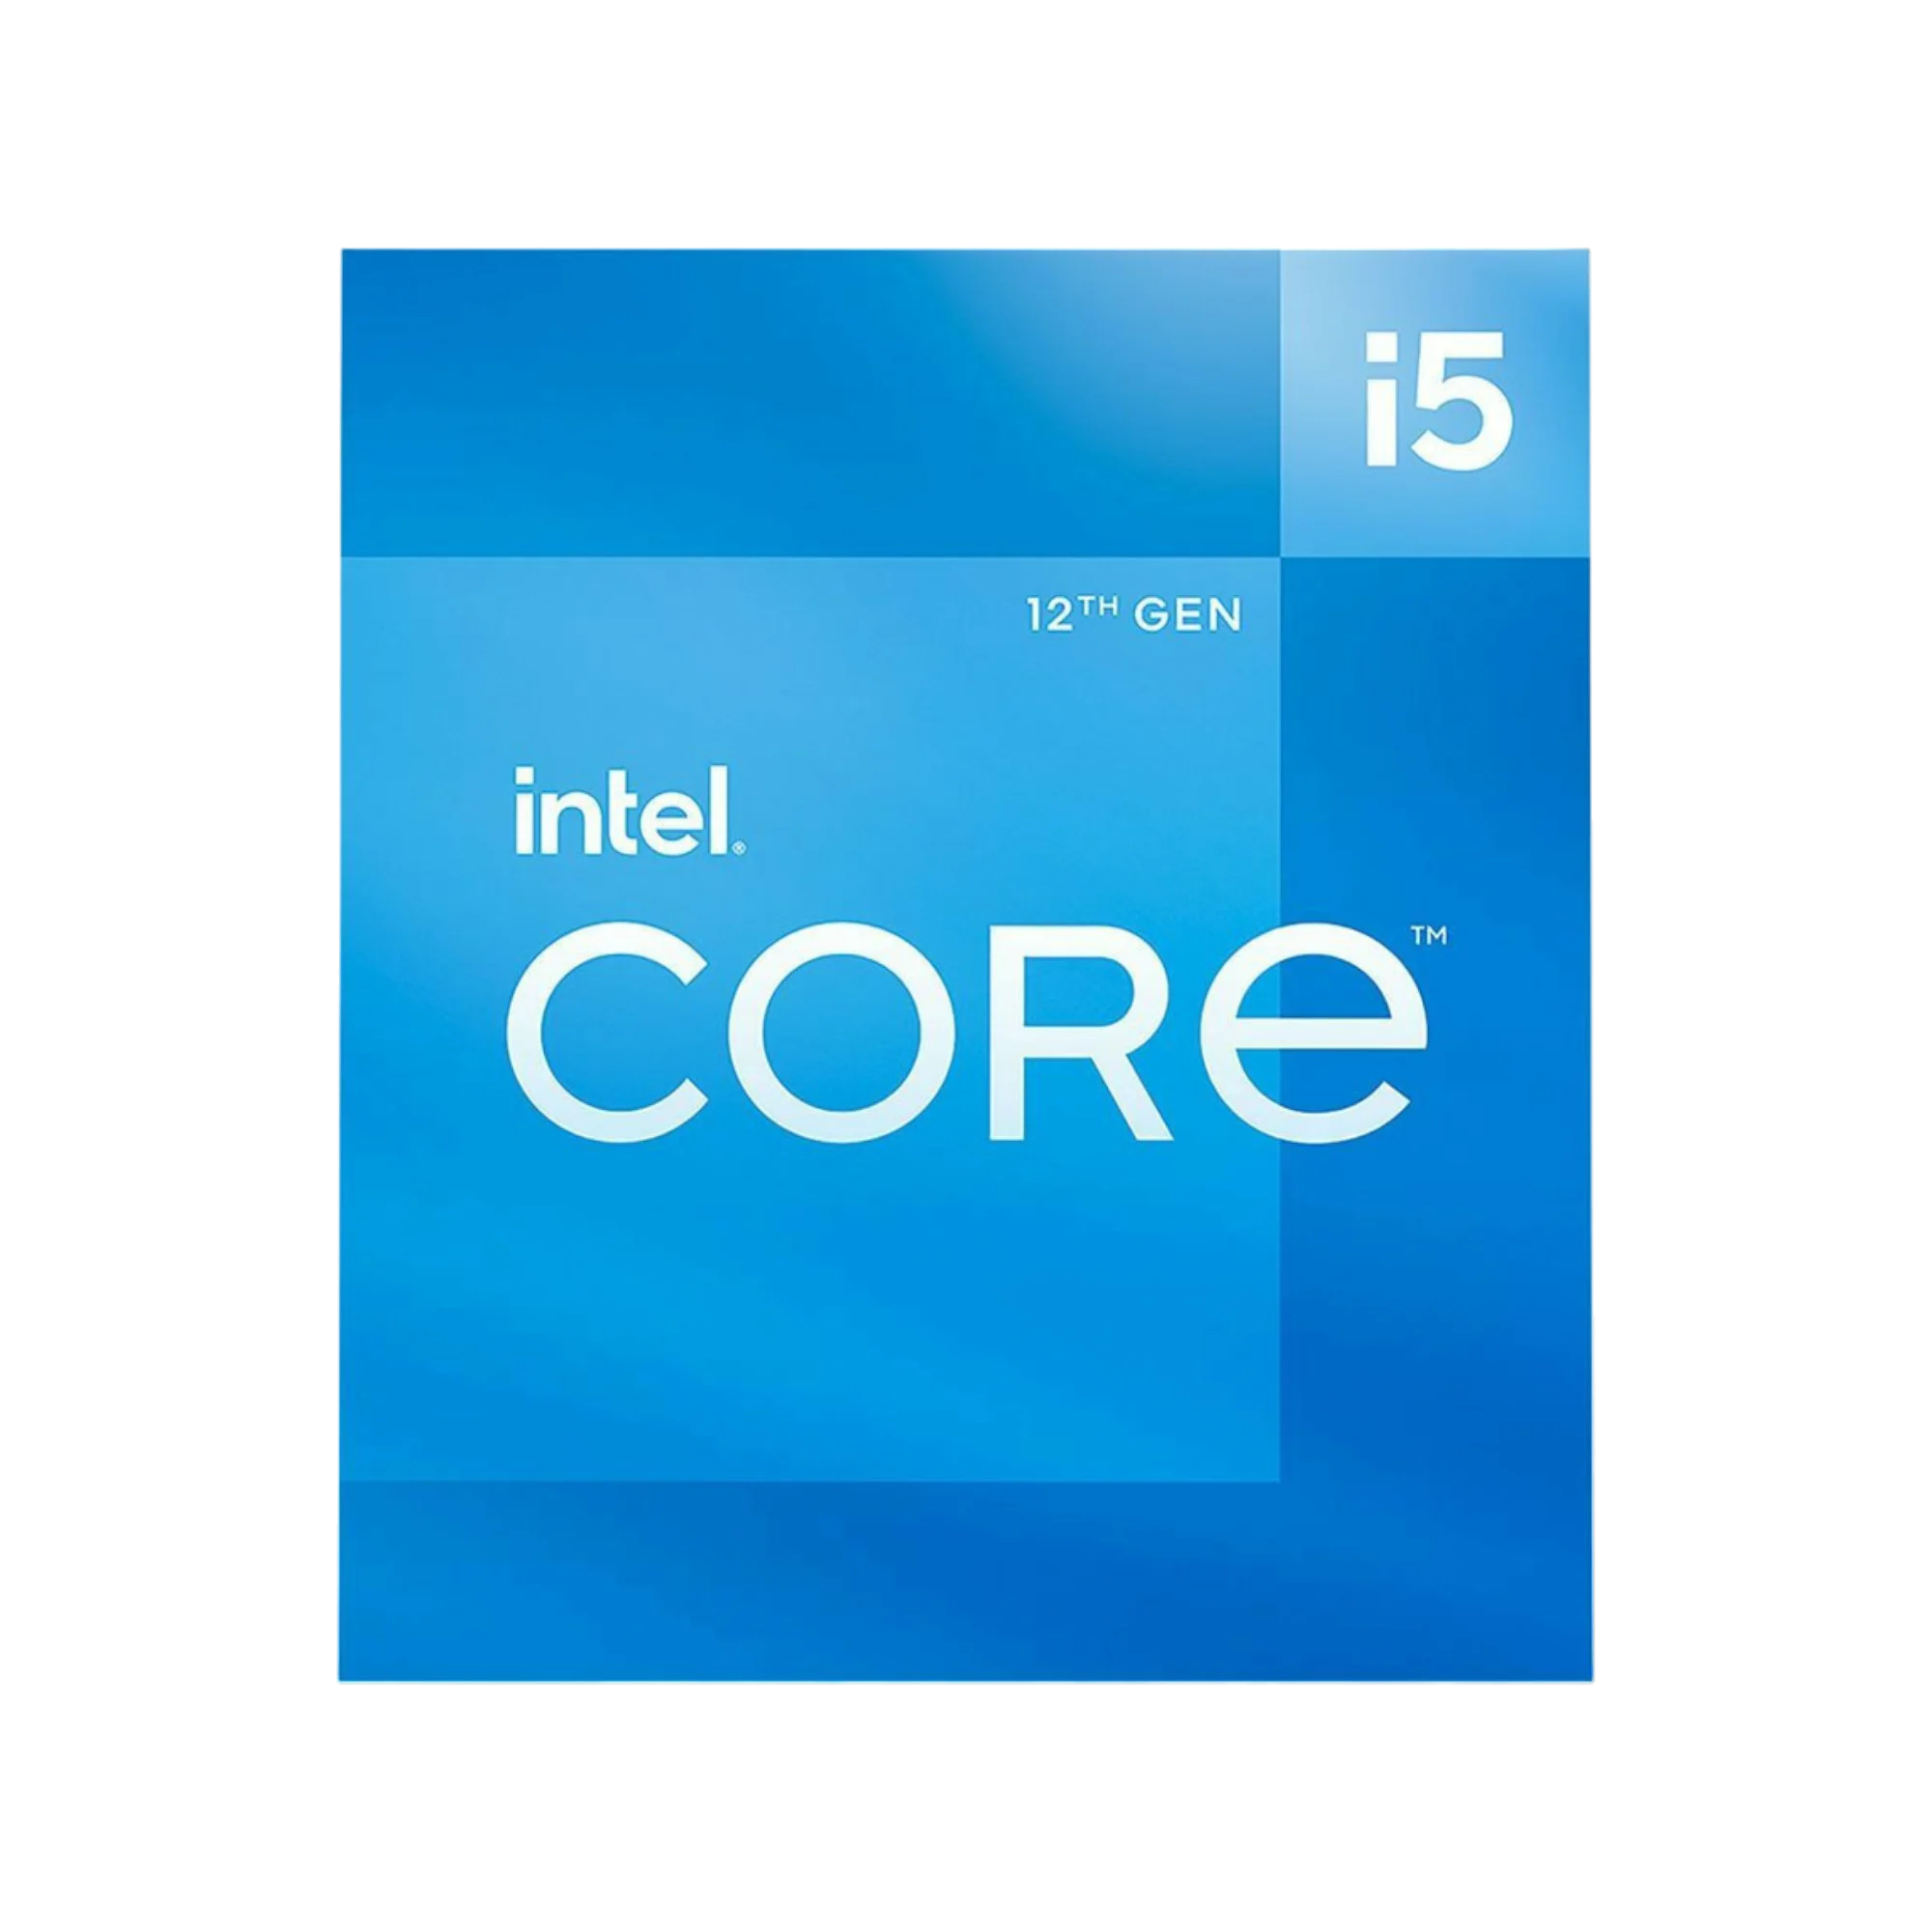 CPU INTEL Core i5-12400F 2.5GHz up to 4.40GHz 6C12T s1700 1